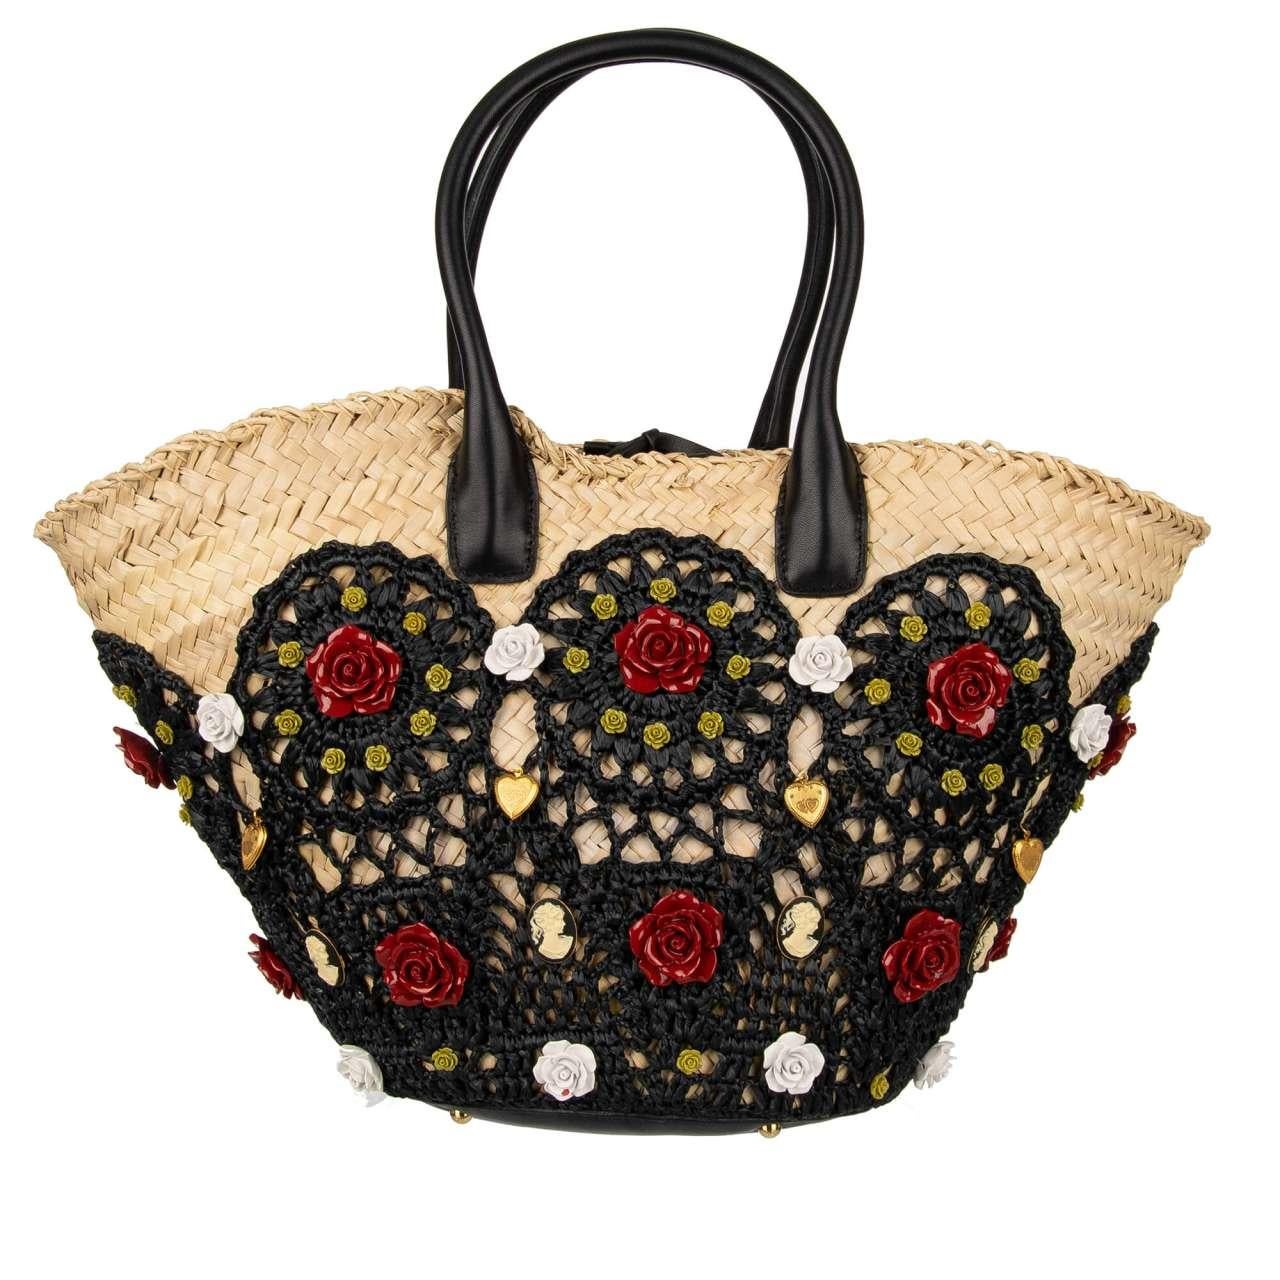 Women's D&G Large Jeweled Straw Basket Beach Bag KENDRA with Roses Black Beige For Sale